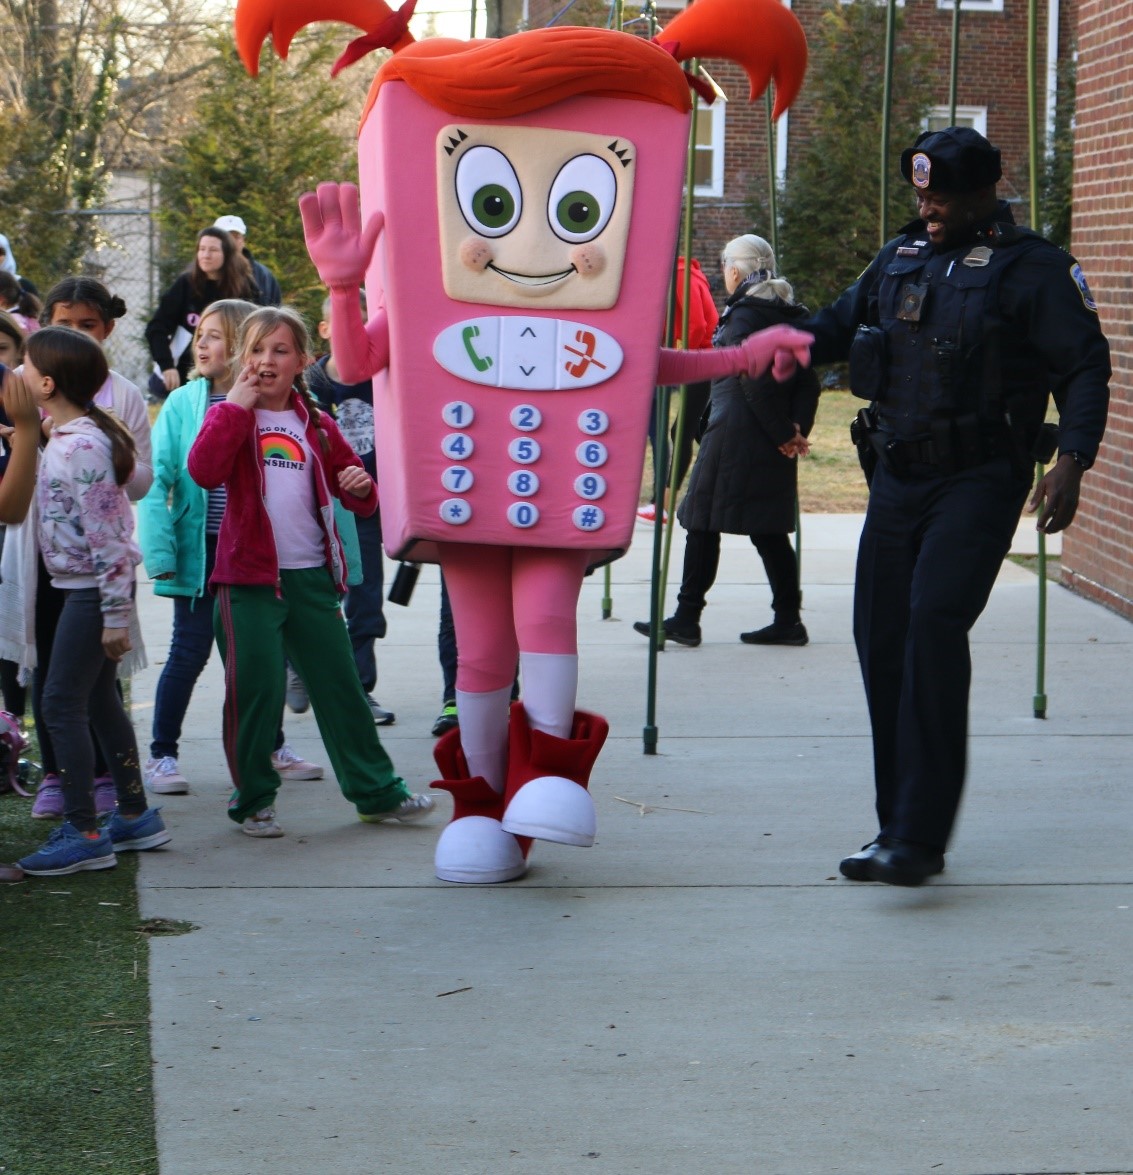 Cell Phone Sally, OUC's mascot, visits students with Officer Friendly.